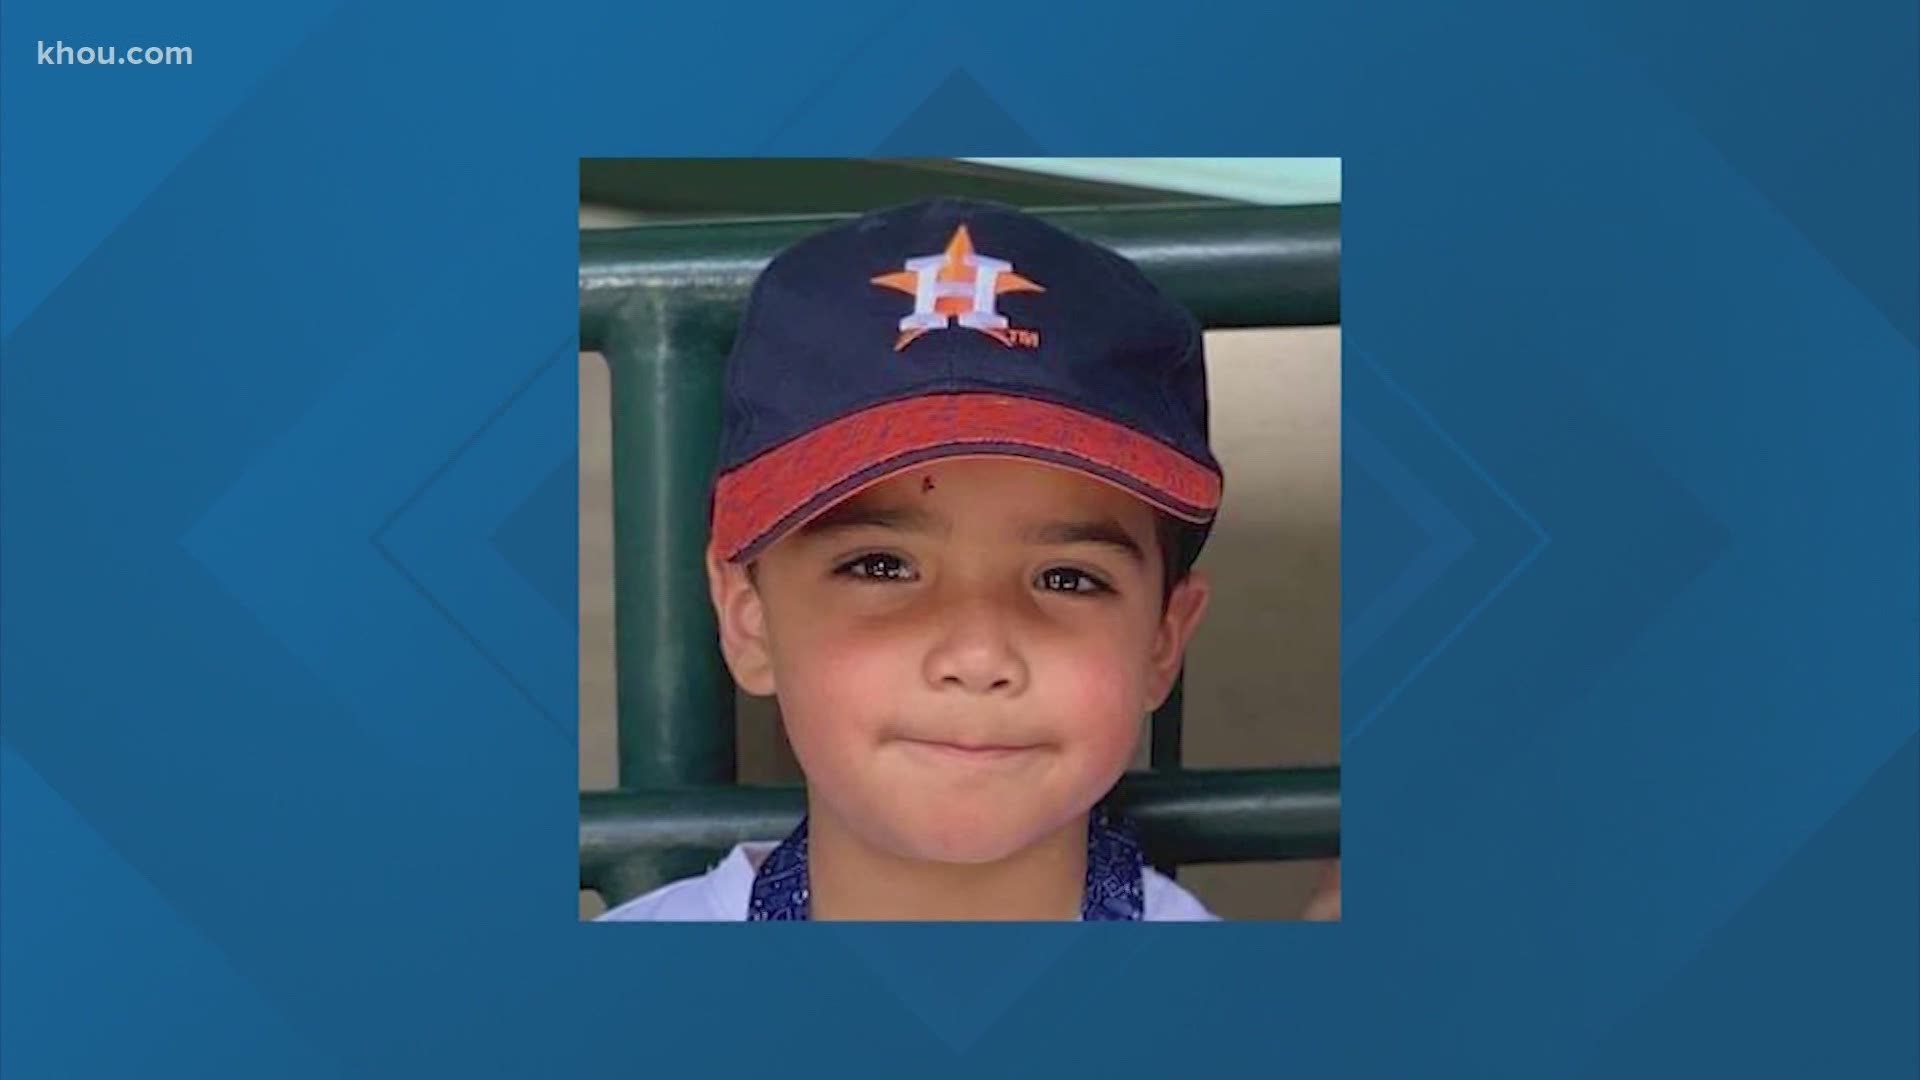 Josiah McIntyre died in early September. The CDC found traces of the amoeba in the boy's home, a nearby fire hydrant, and the city's splash pad.